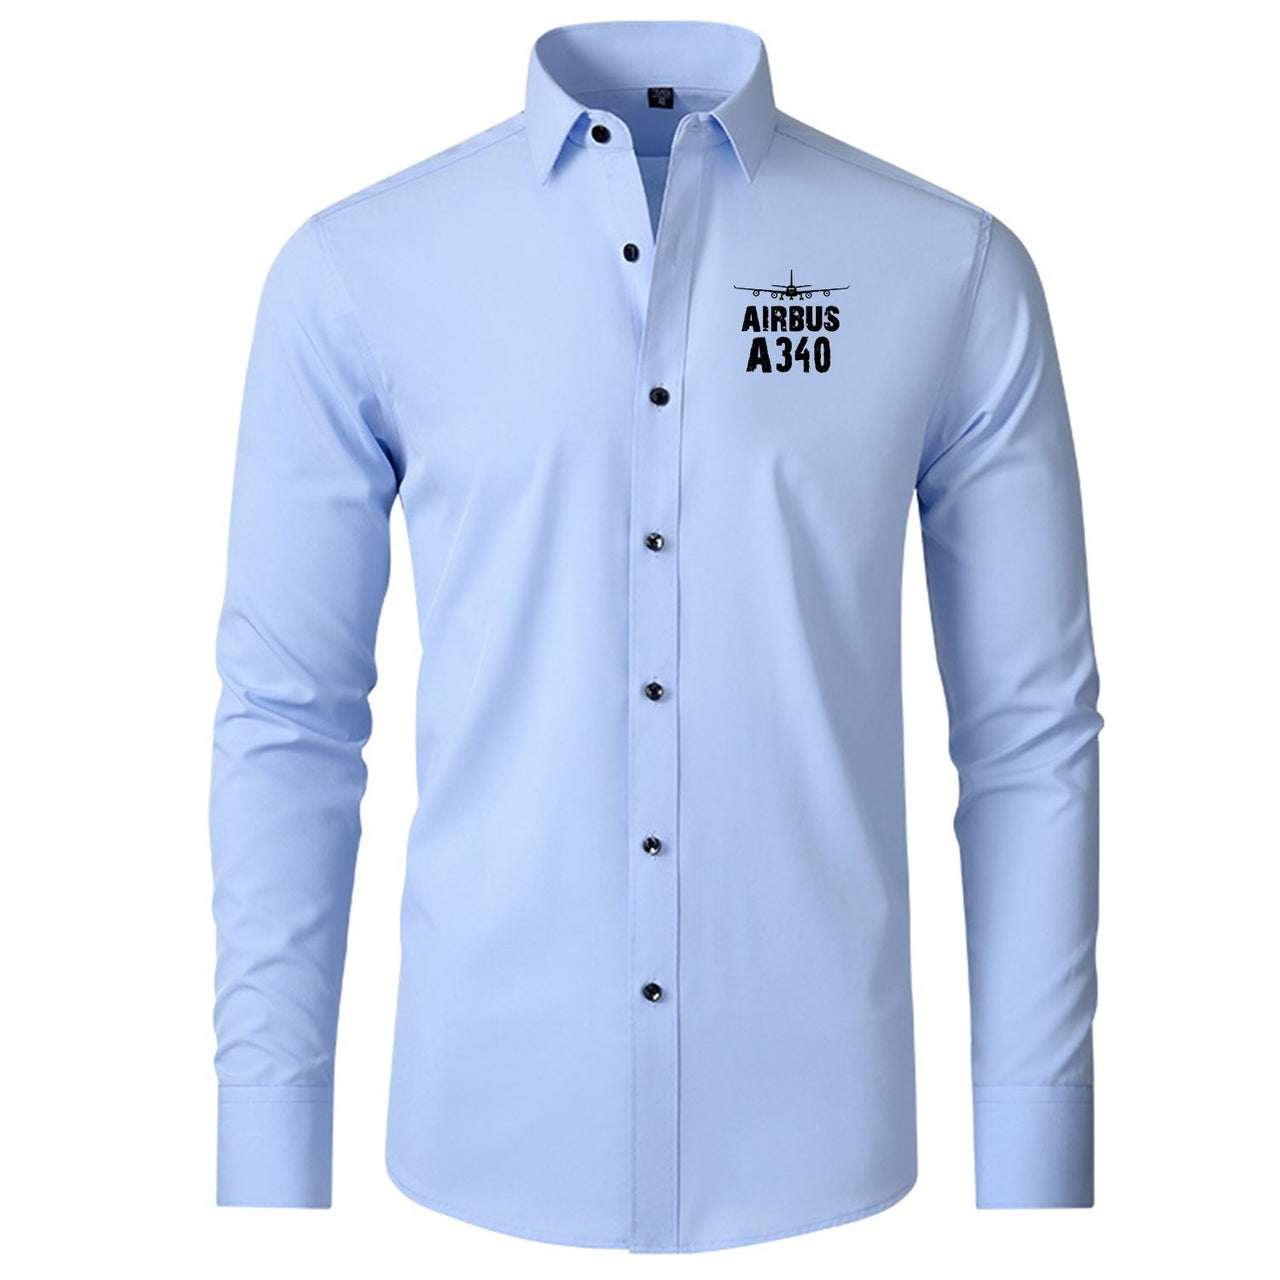 Airbus A340 & Plane Designed Long Sleeve Shirts